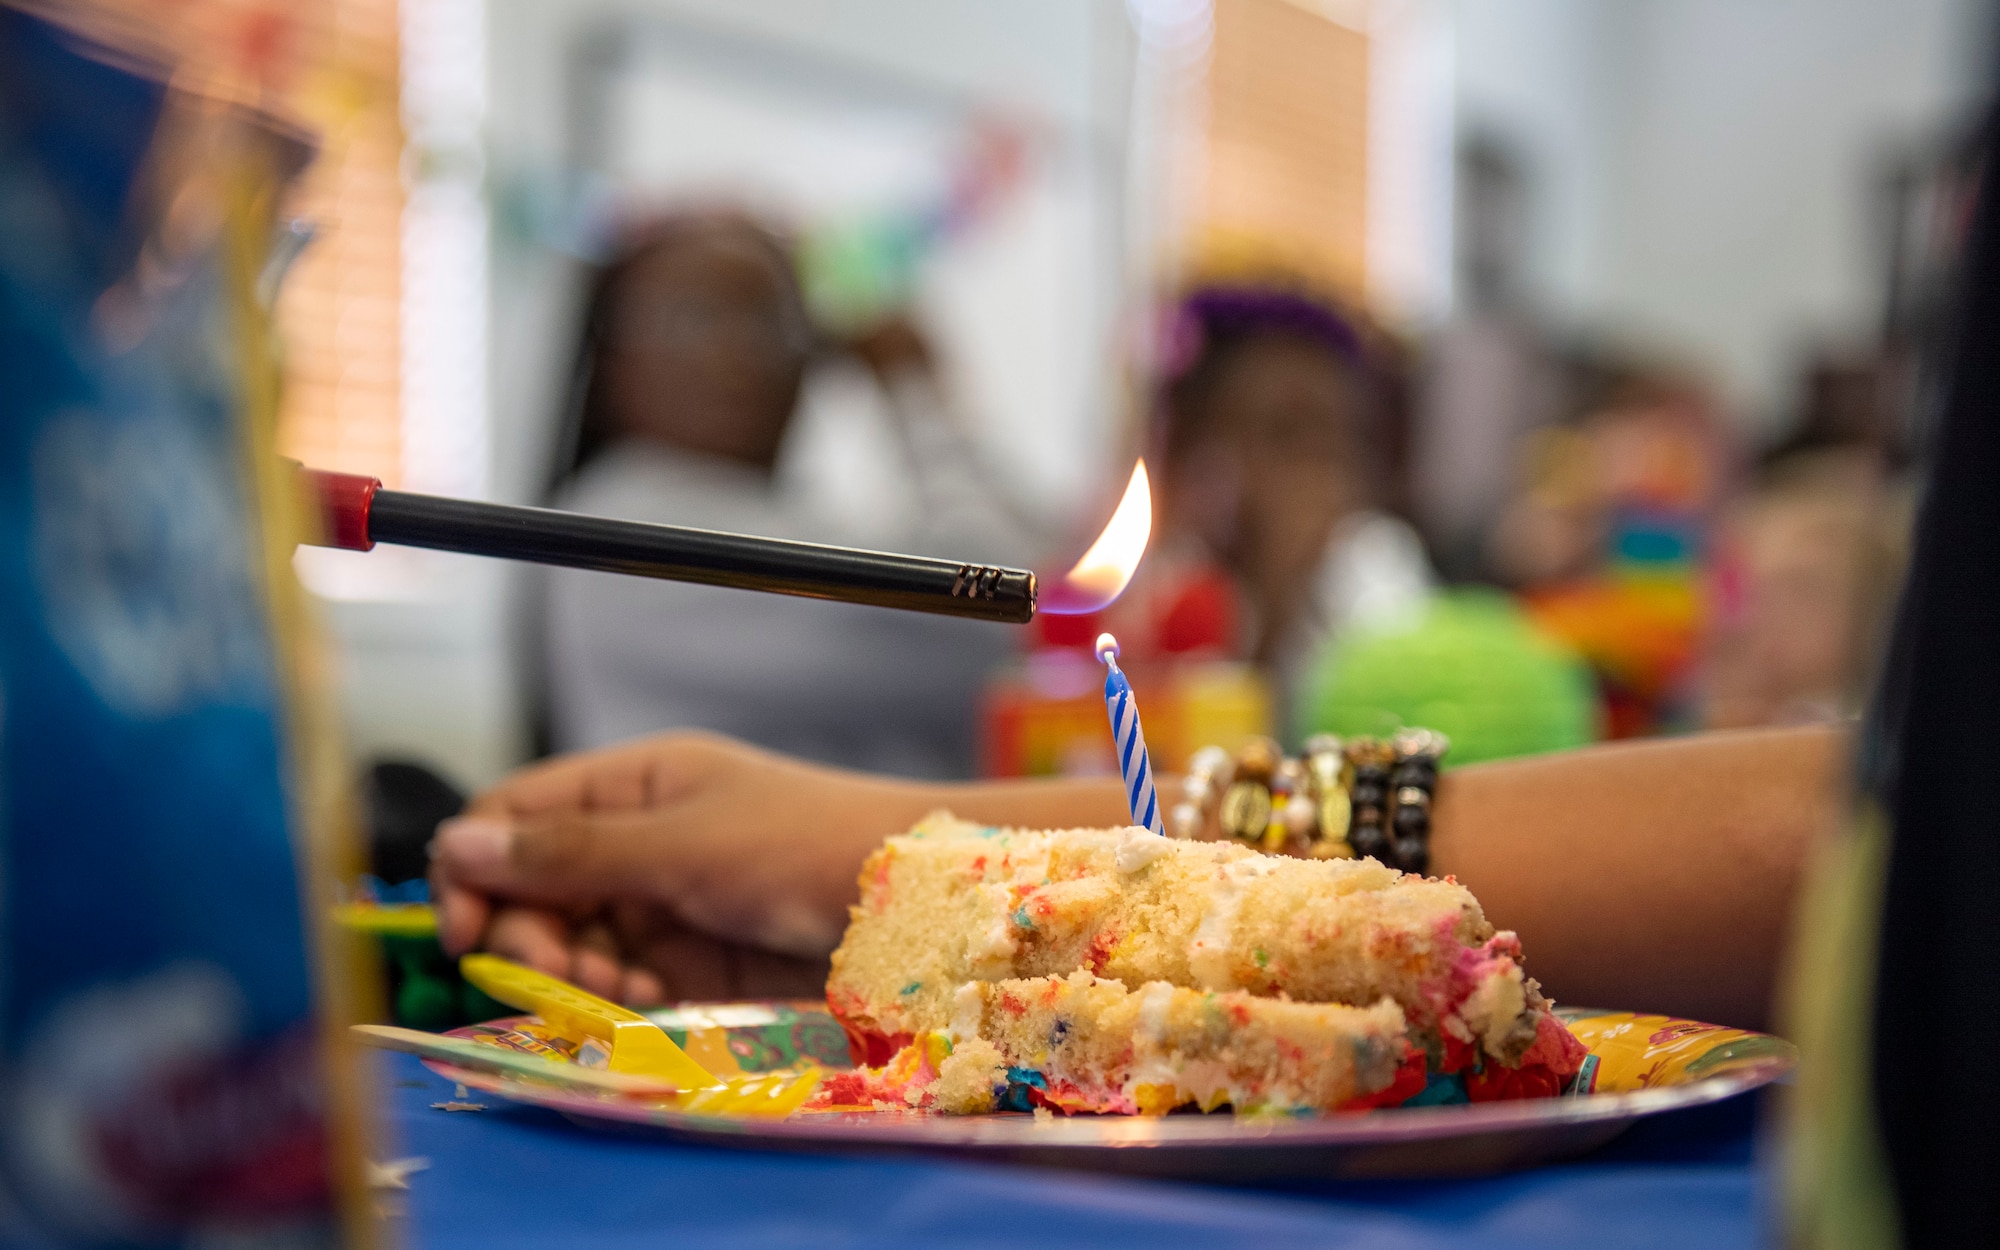 A candle is lit on a piece of cake to celebrate the birthdays of children in foster care at the New Life Village campus located in Tampa, Florida, May 29, 2022. This month, 10 service members, assigned to MacDill Air Force Base, joined the fun, celebrating with party games, a piñata and cake. (U.S. Air Force photo by Airman 1st Class Lauren Cobin)